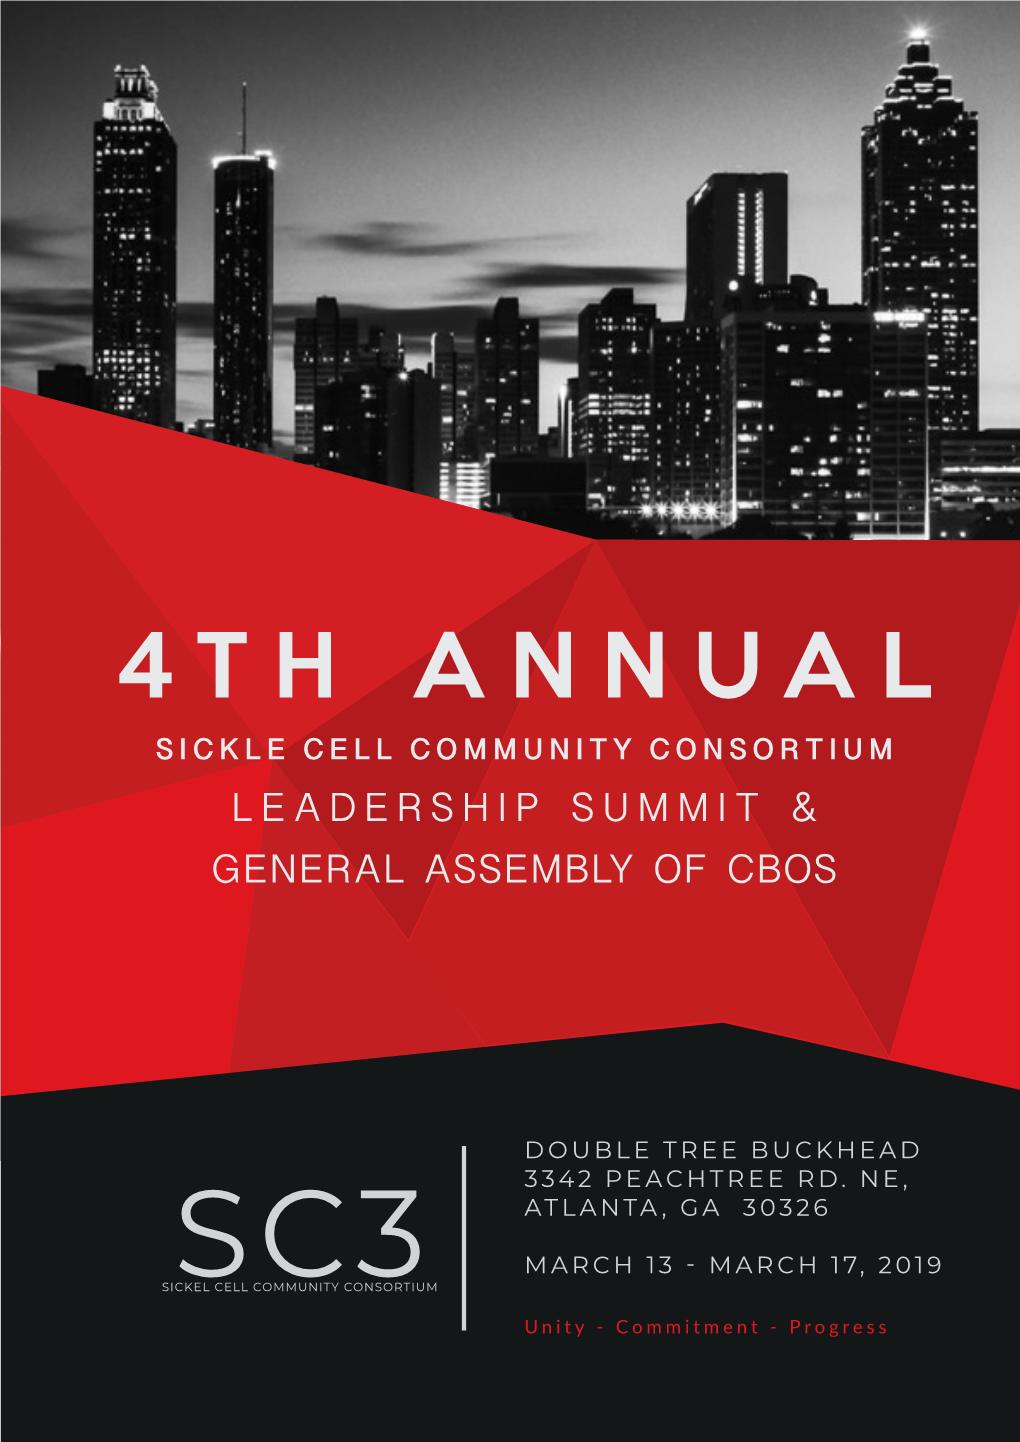 4Th Annual Sickle Cell Community Consortium Leadership Summit & General Assembly of Cbos